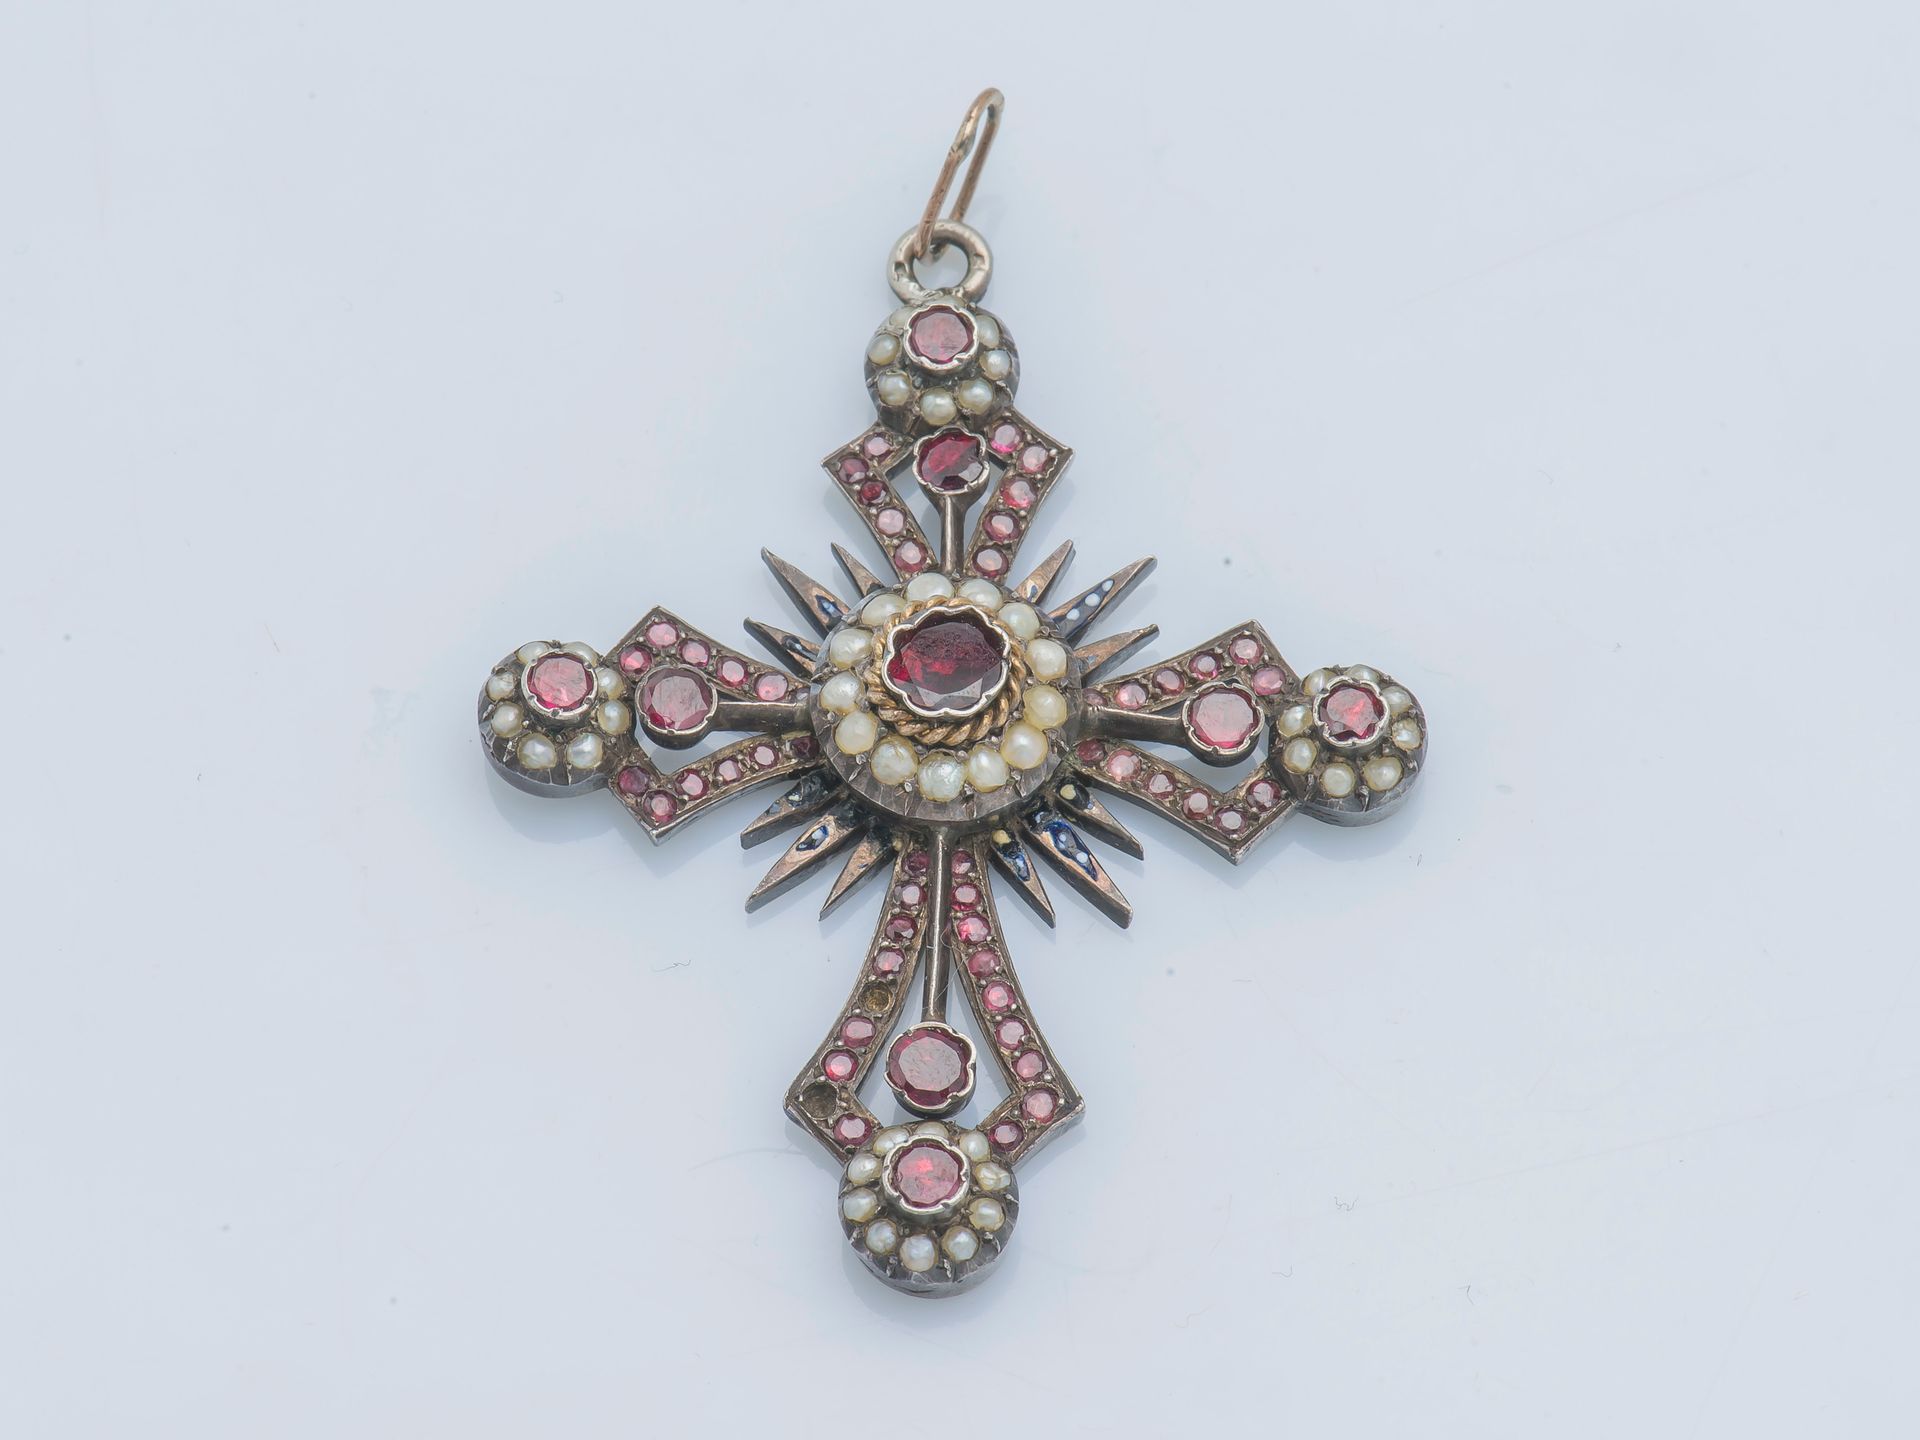 Null Silver cross pendant (800 ‰) of pattee and radiating form, cusped set with &hellip;